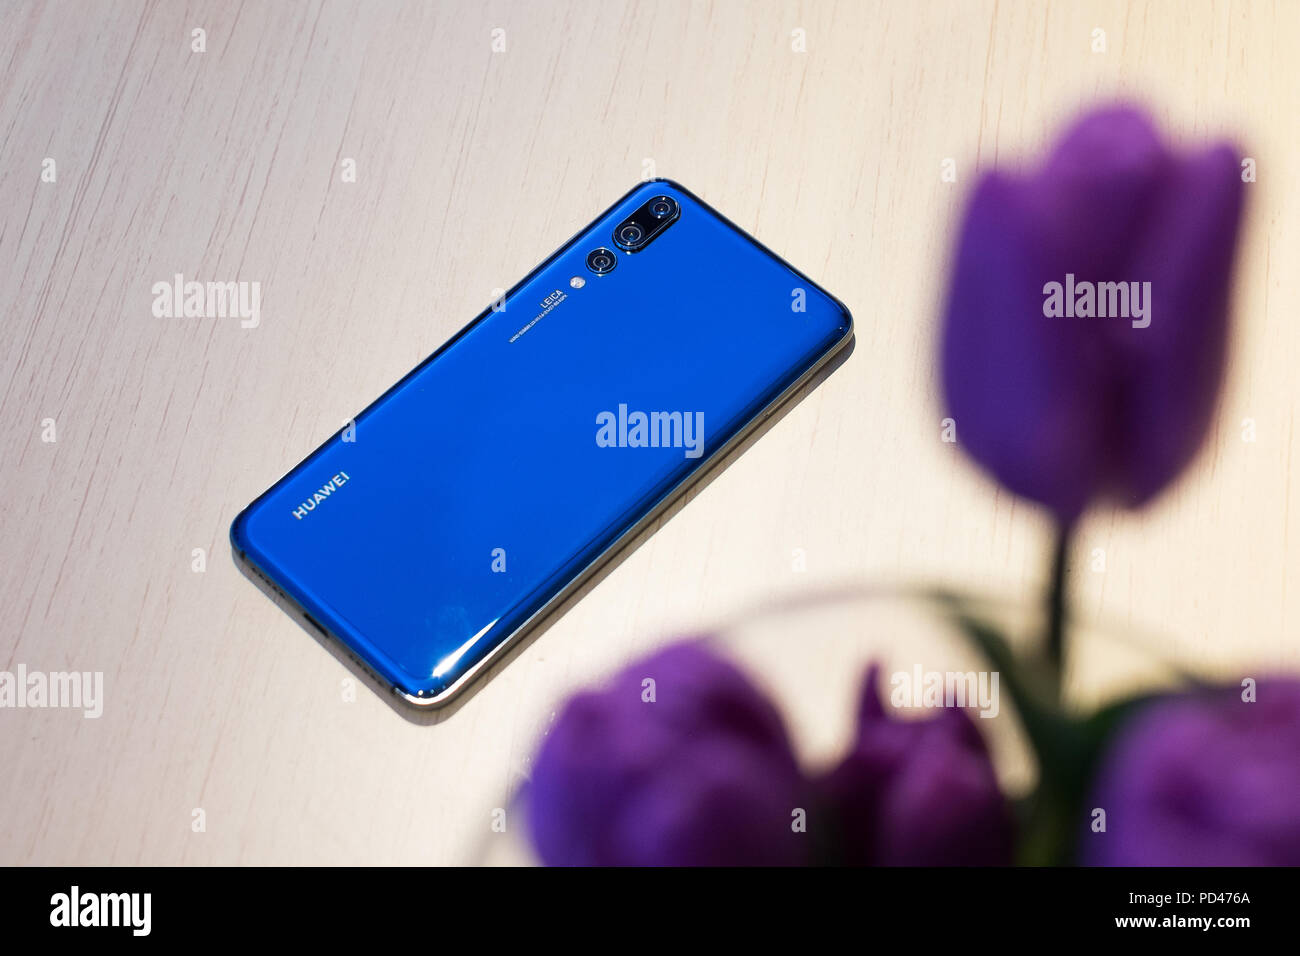 WARSAW, MARCH 2018 - Newly launched Huawei P20 Pro smarpthone is displayed for editorial purposes Stock Photo